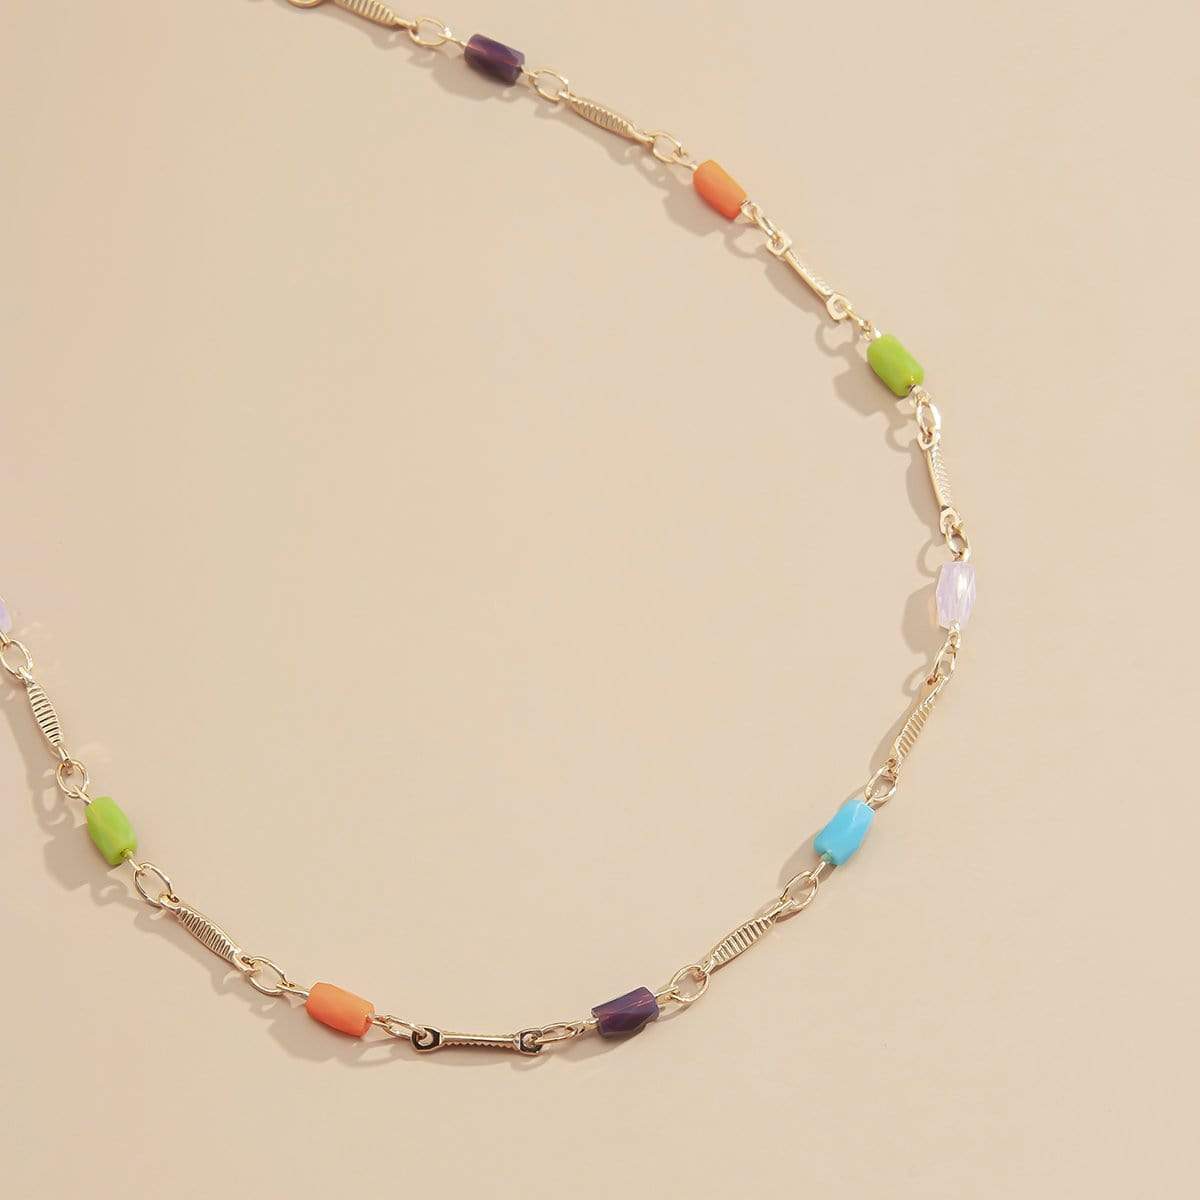 Trendy Colorful Acrylic Cylindricity Charm Choker Necklace